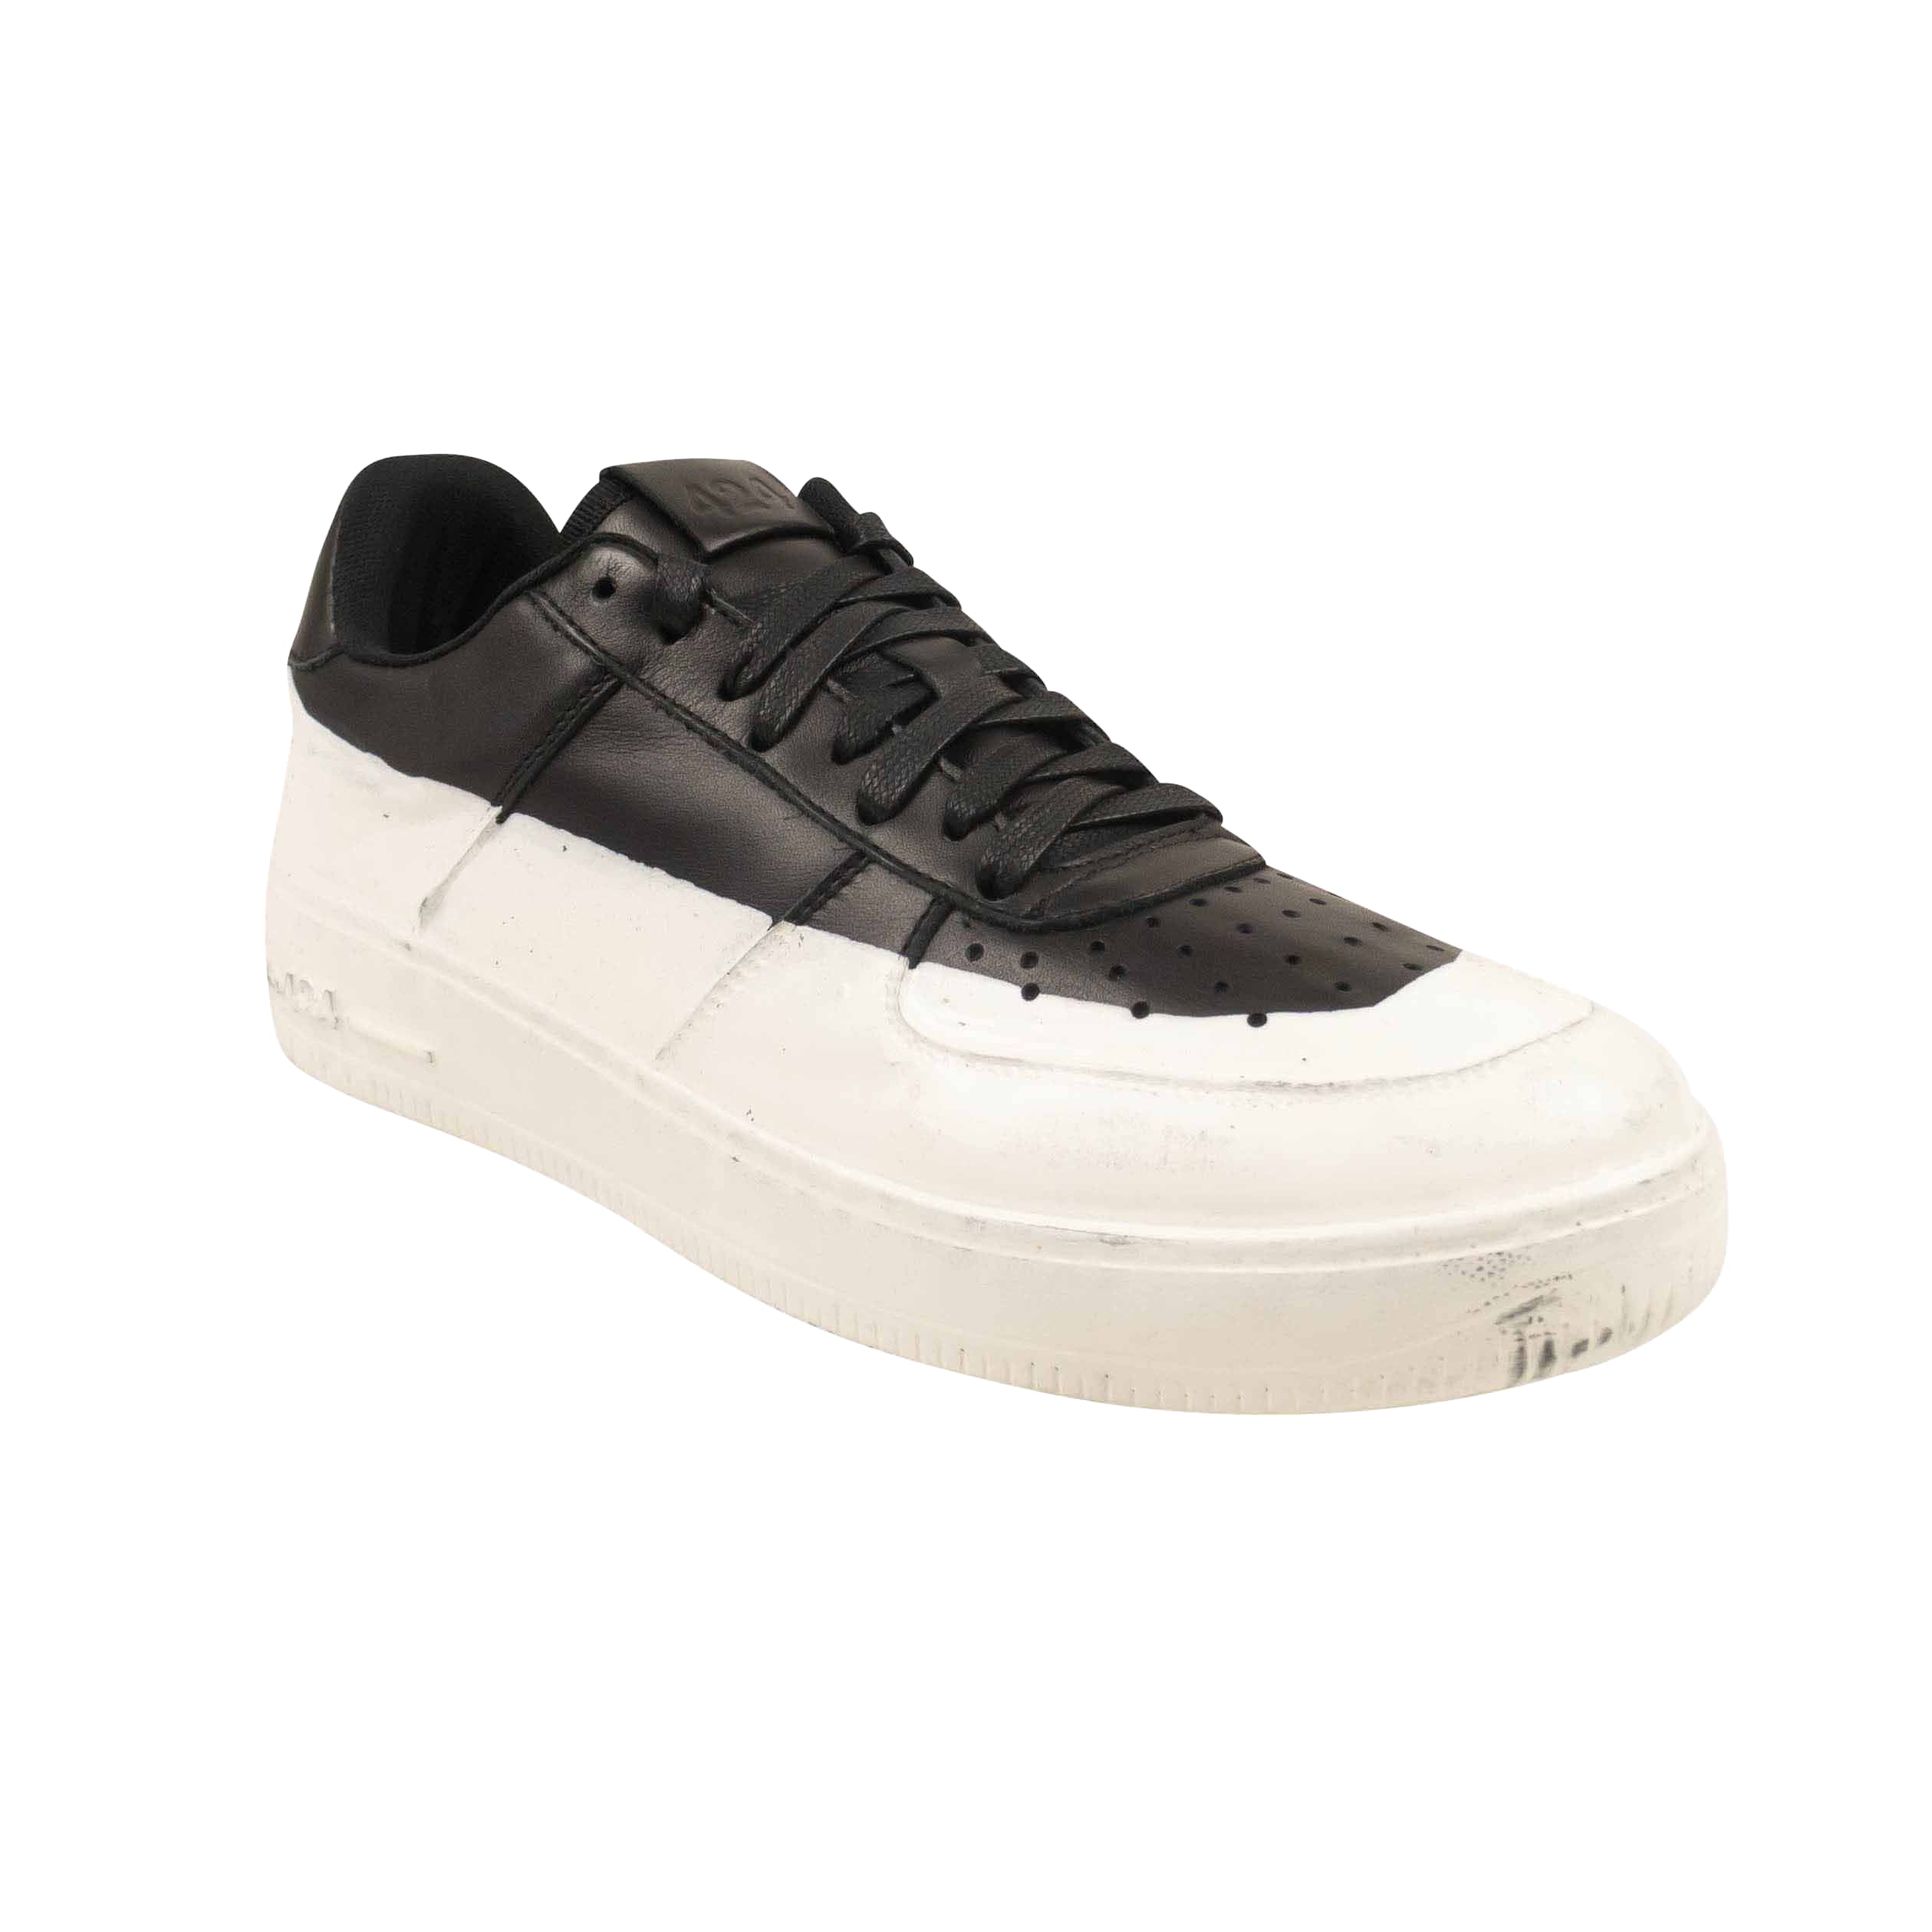 424 On Fairfax Dip Low Sneaker Barney'S Exclusive - Black